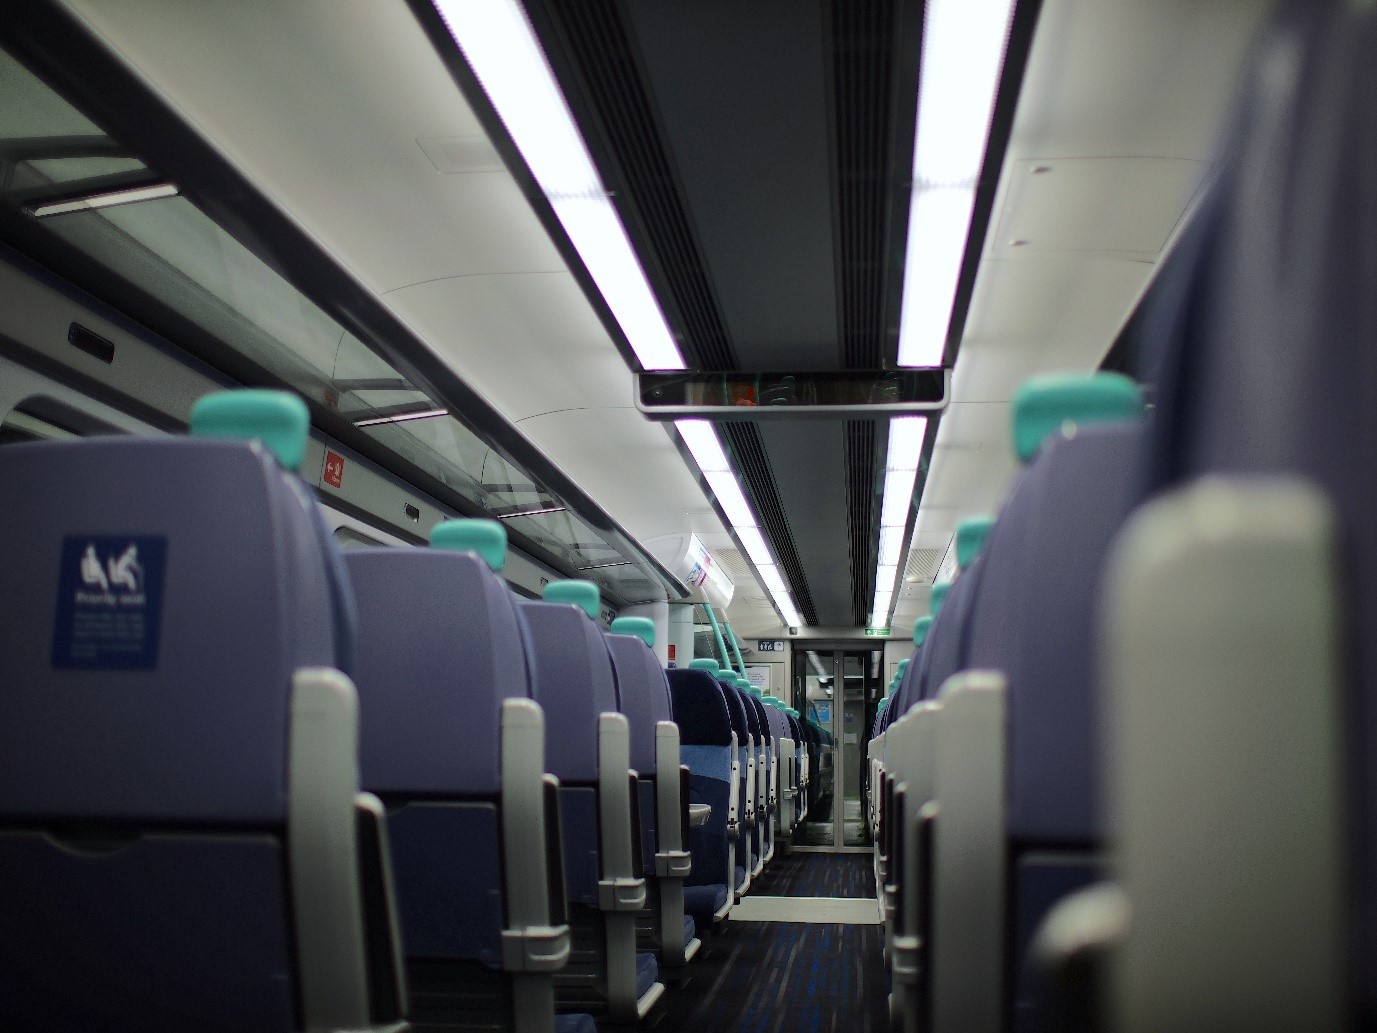 The interior of the first refurbished train